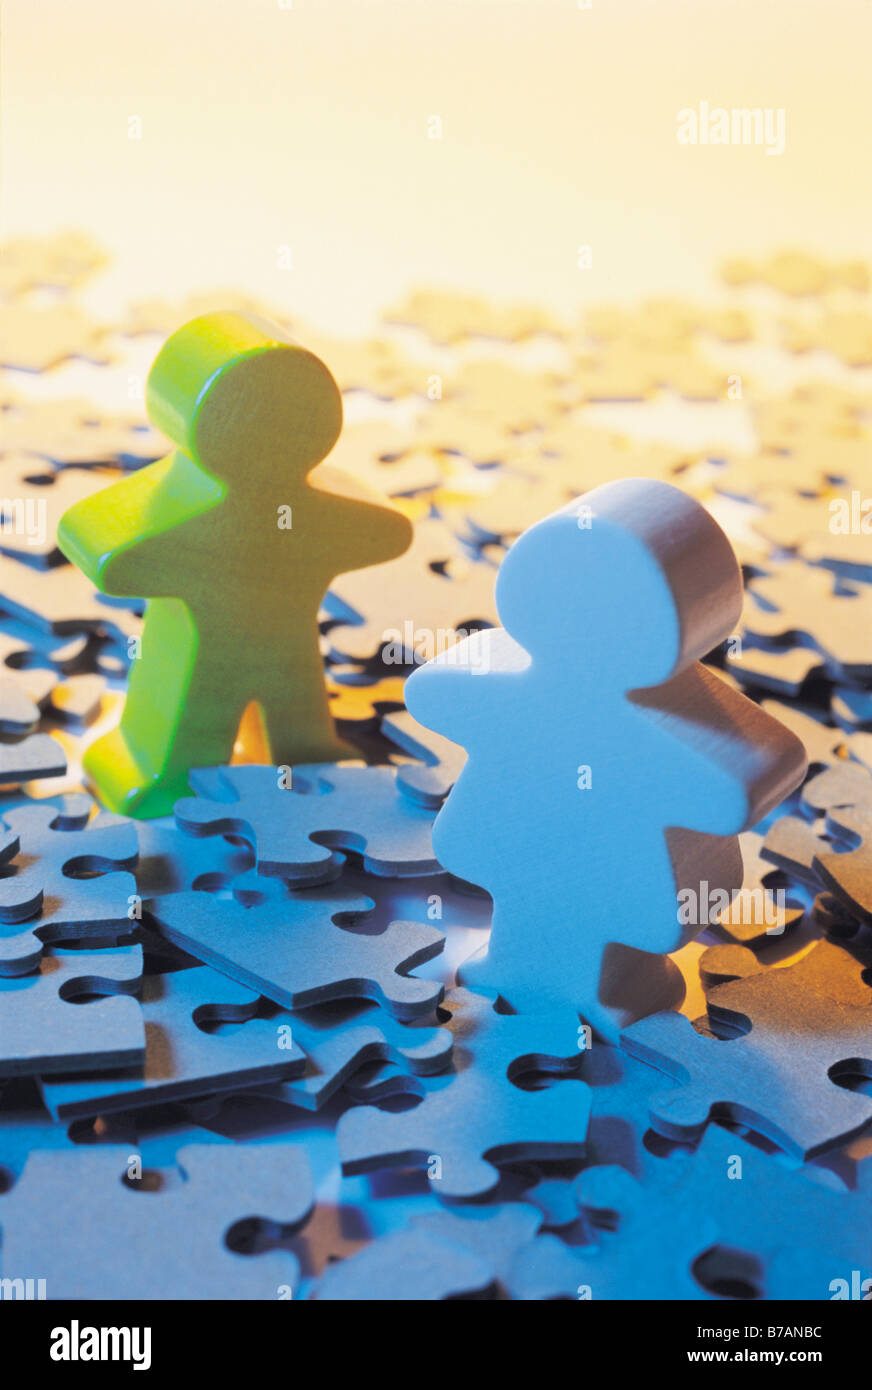 Wooden children figures on pieces of jigsaw puzzle Stock Photo